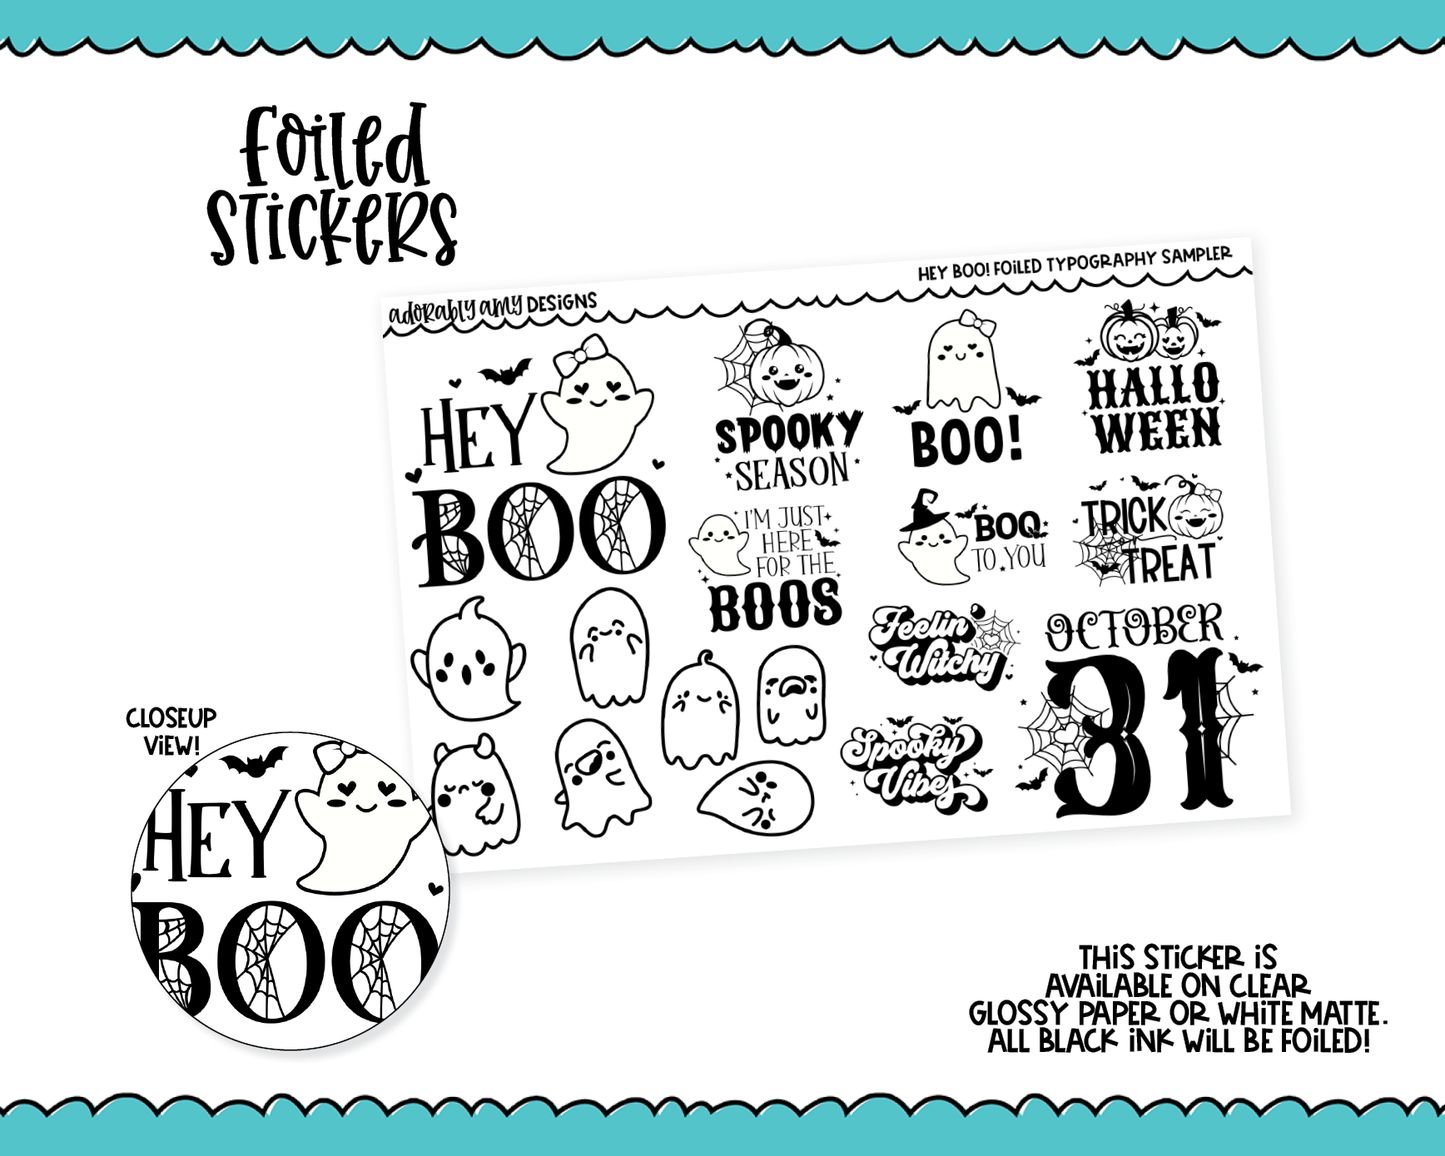 Foiled Hey Boo! Doodled Halloween Ghosts Typography Sampler Planner Stickers for any Planner or Insert